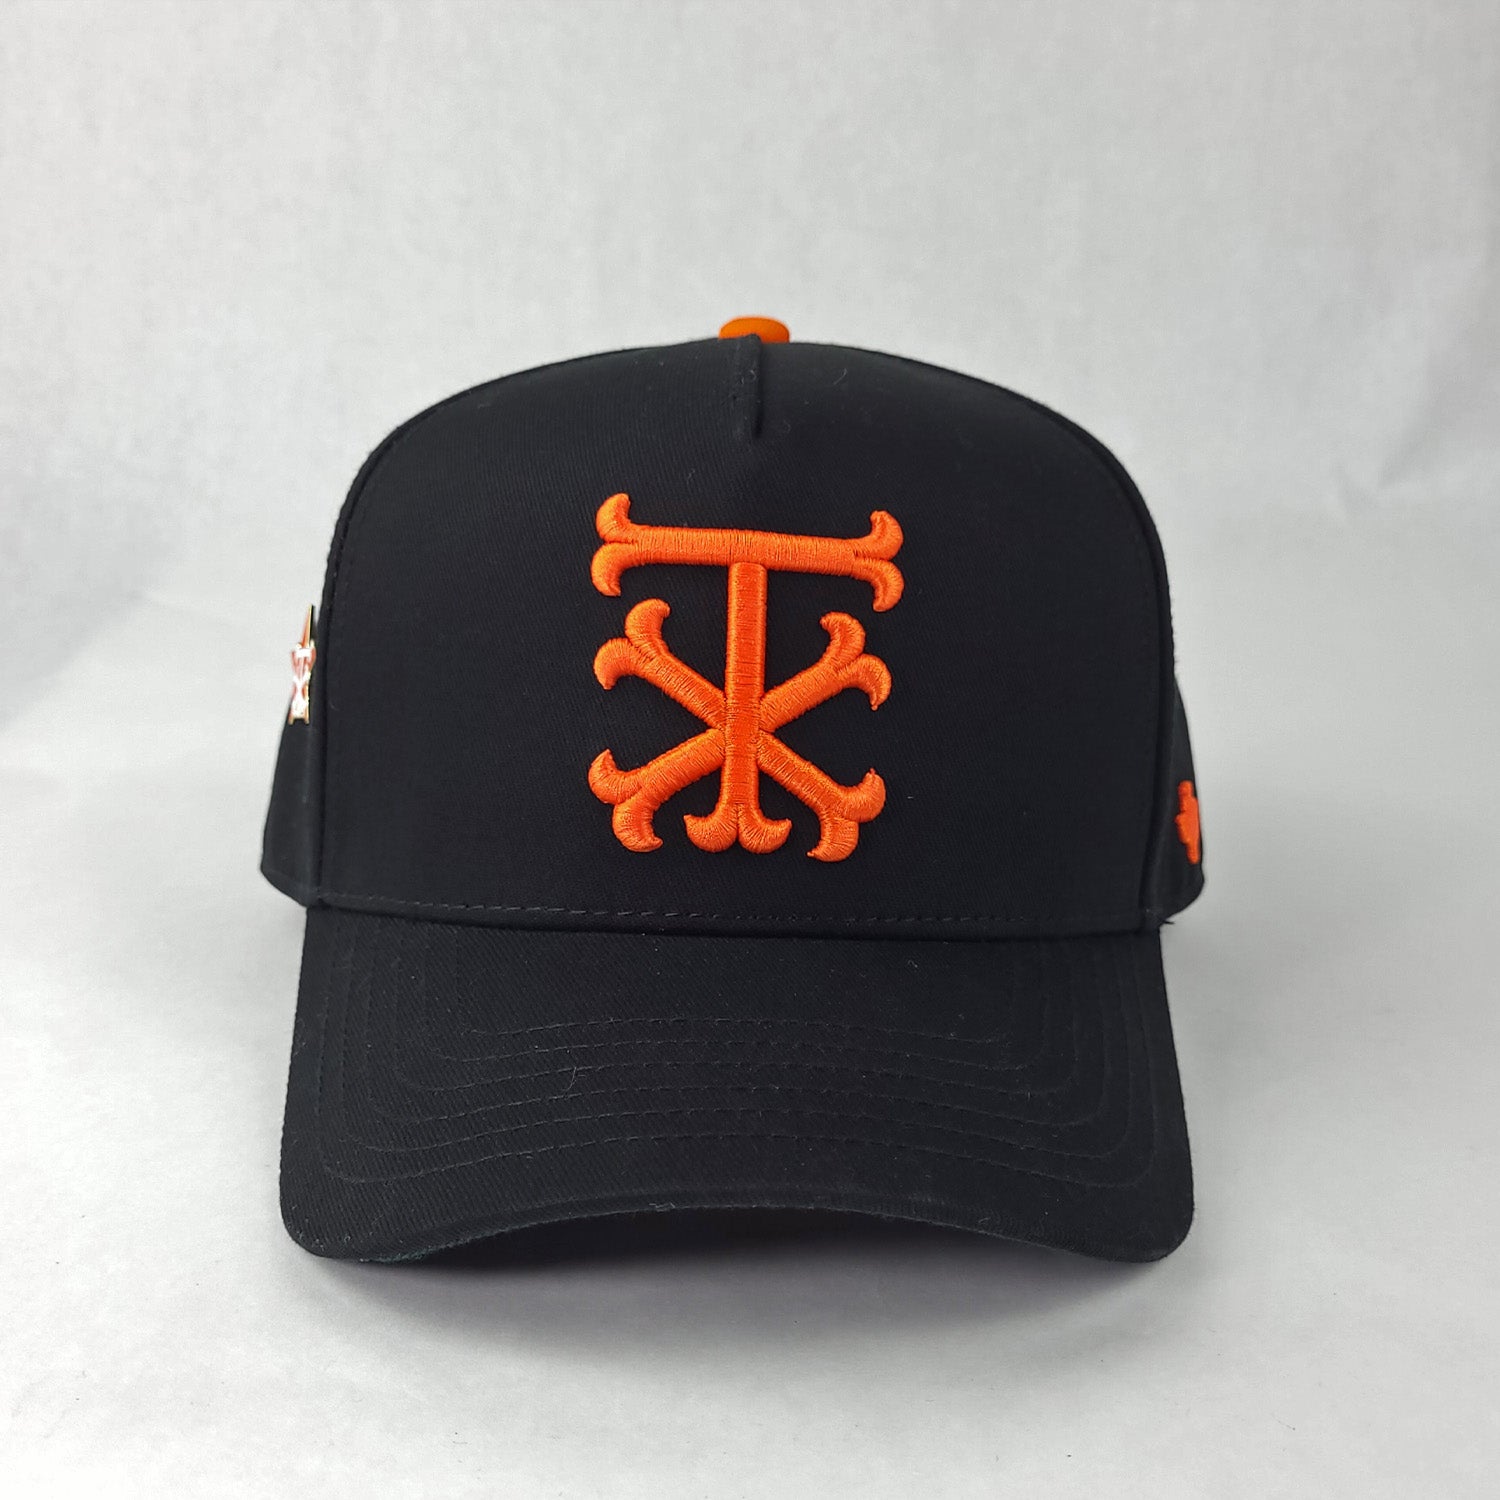 Txers, Txers Gear, Ruthless, Texas hat, TX hat, Dugouts, New era, Snapback, Texas, Texas hat, Snapback hat, Facebook, Purchase, Add to cart, 59fifty